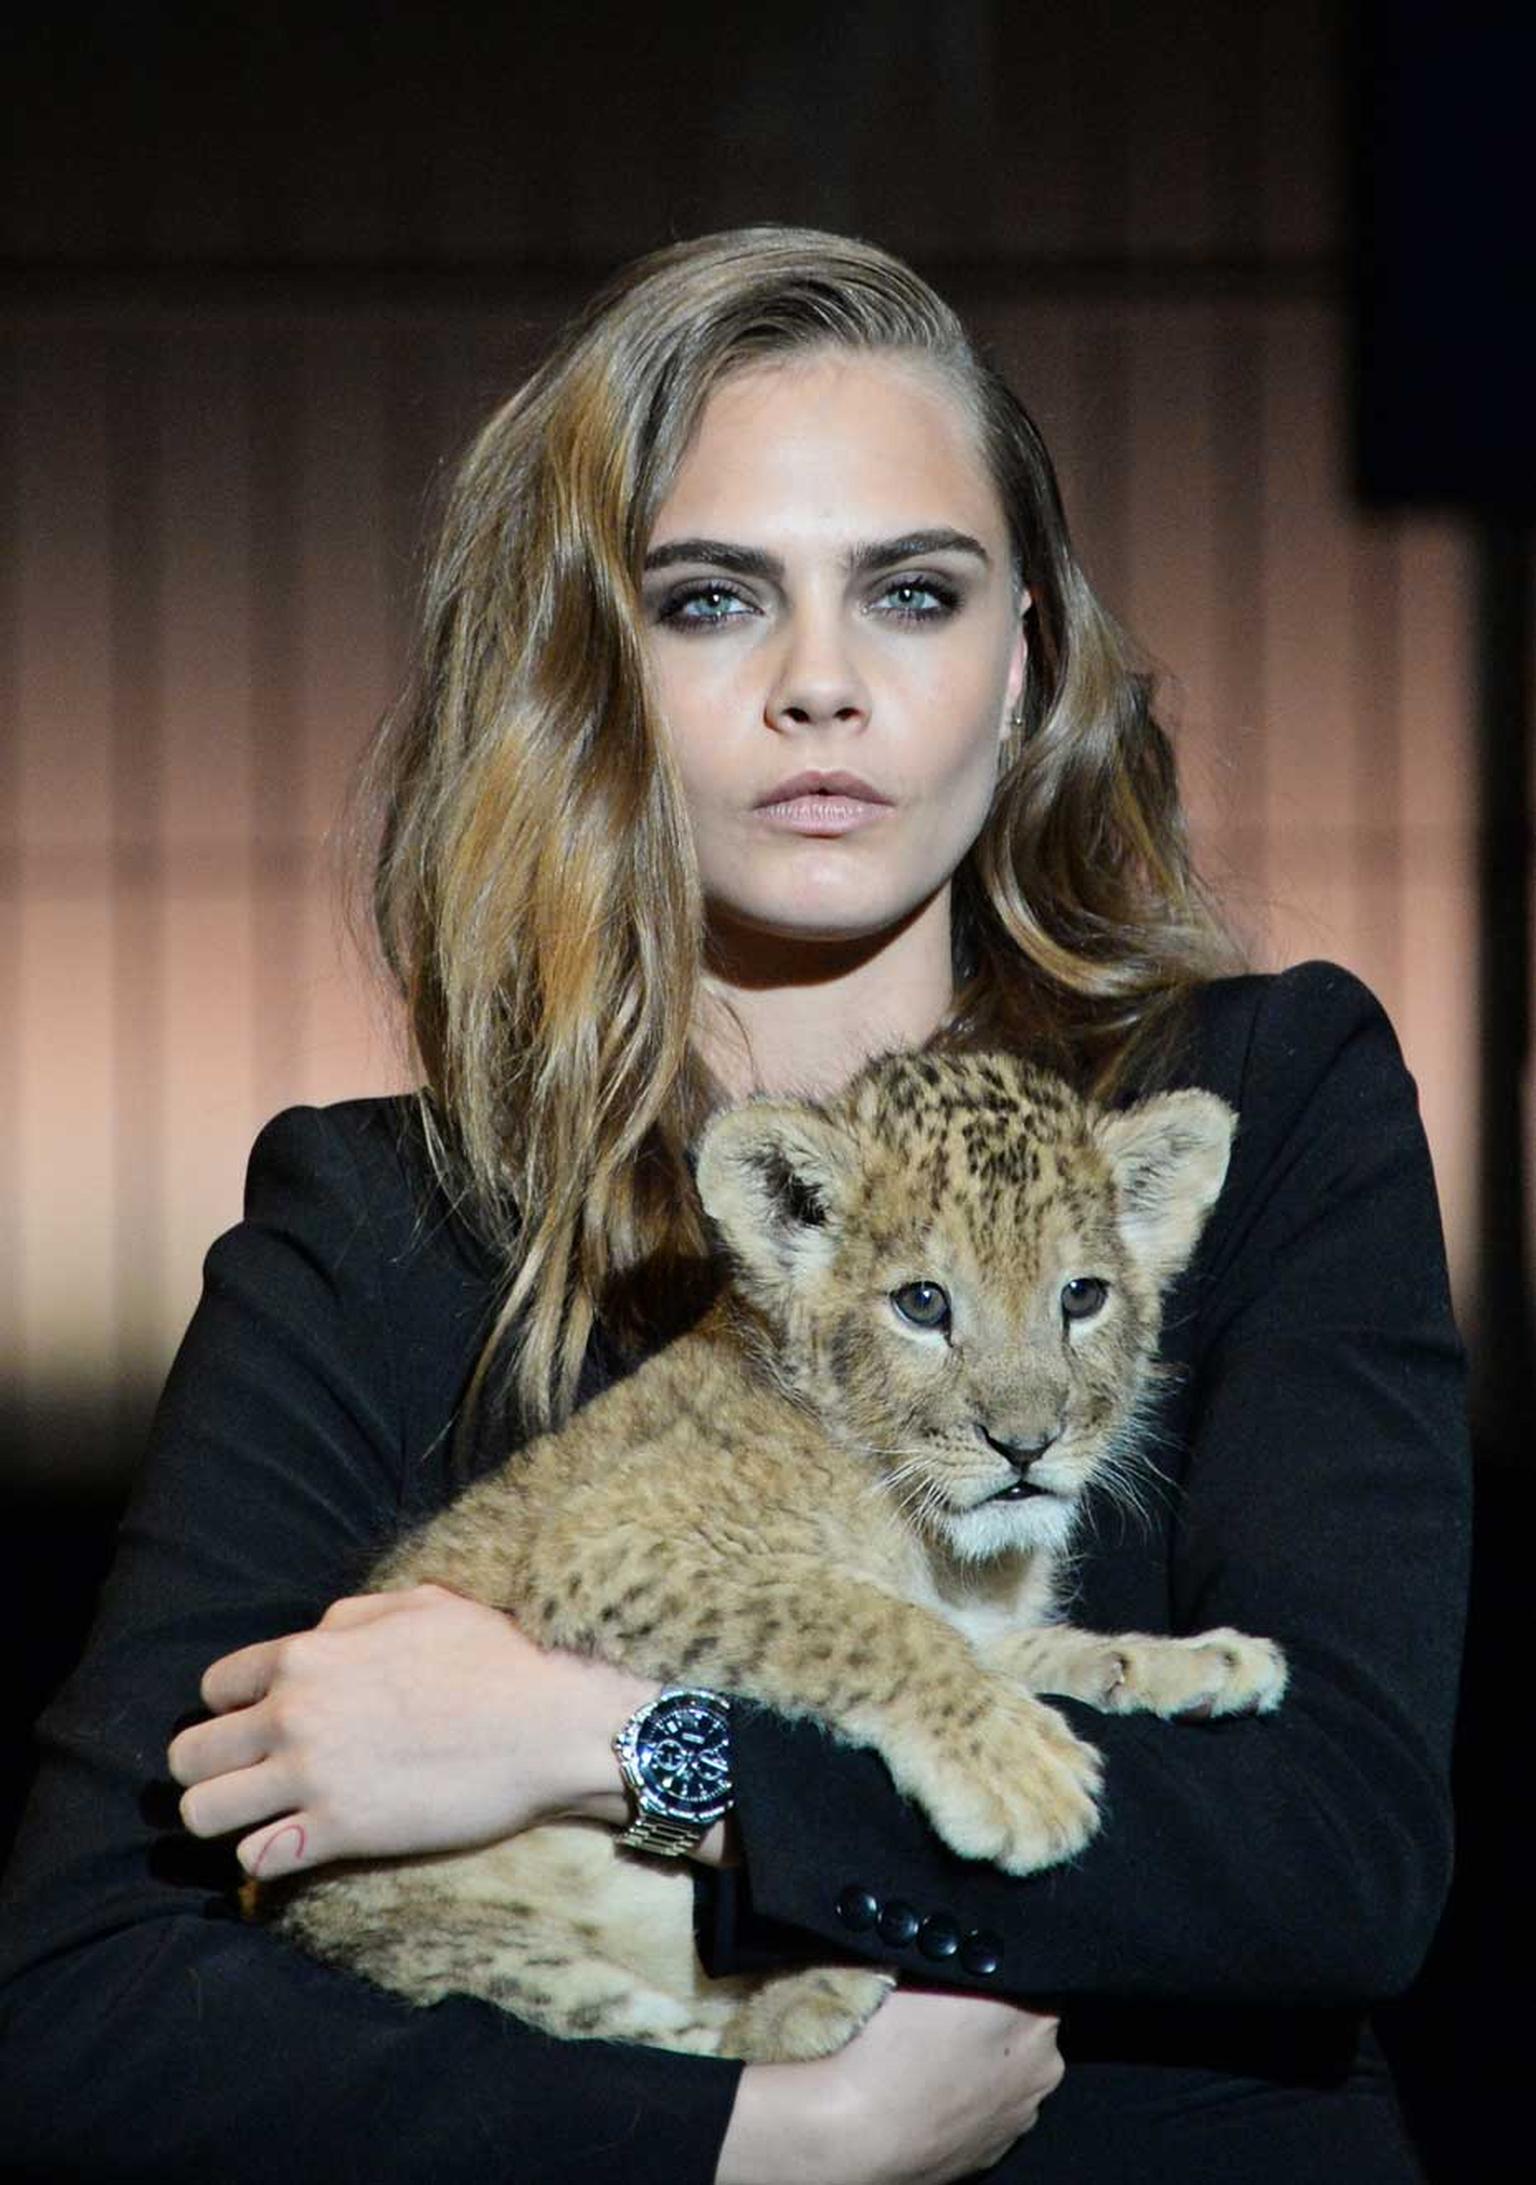 Chick with attitude: Cara Delevingne has been chosen by TAG Heuer watches as its new ambassador and appeared on stage cuddling a lion cub.